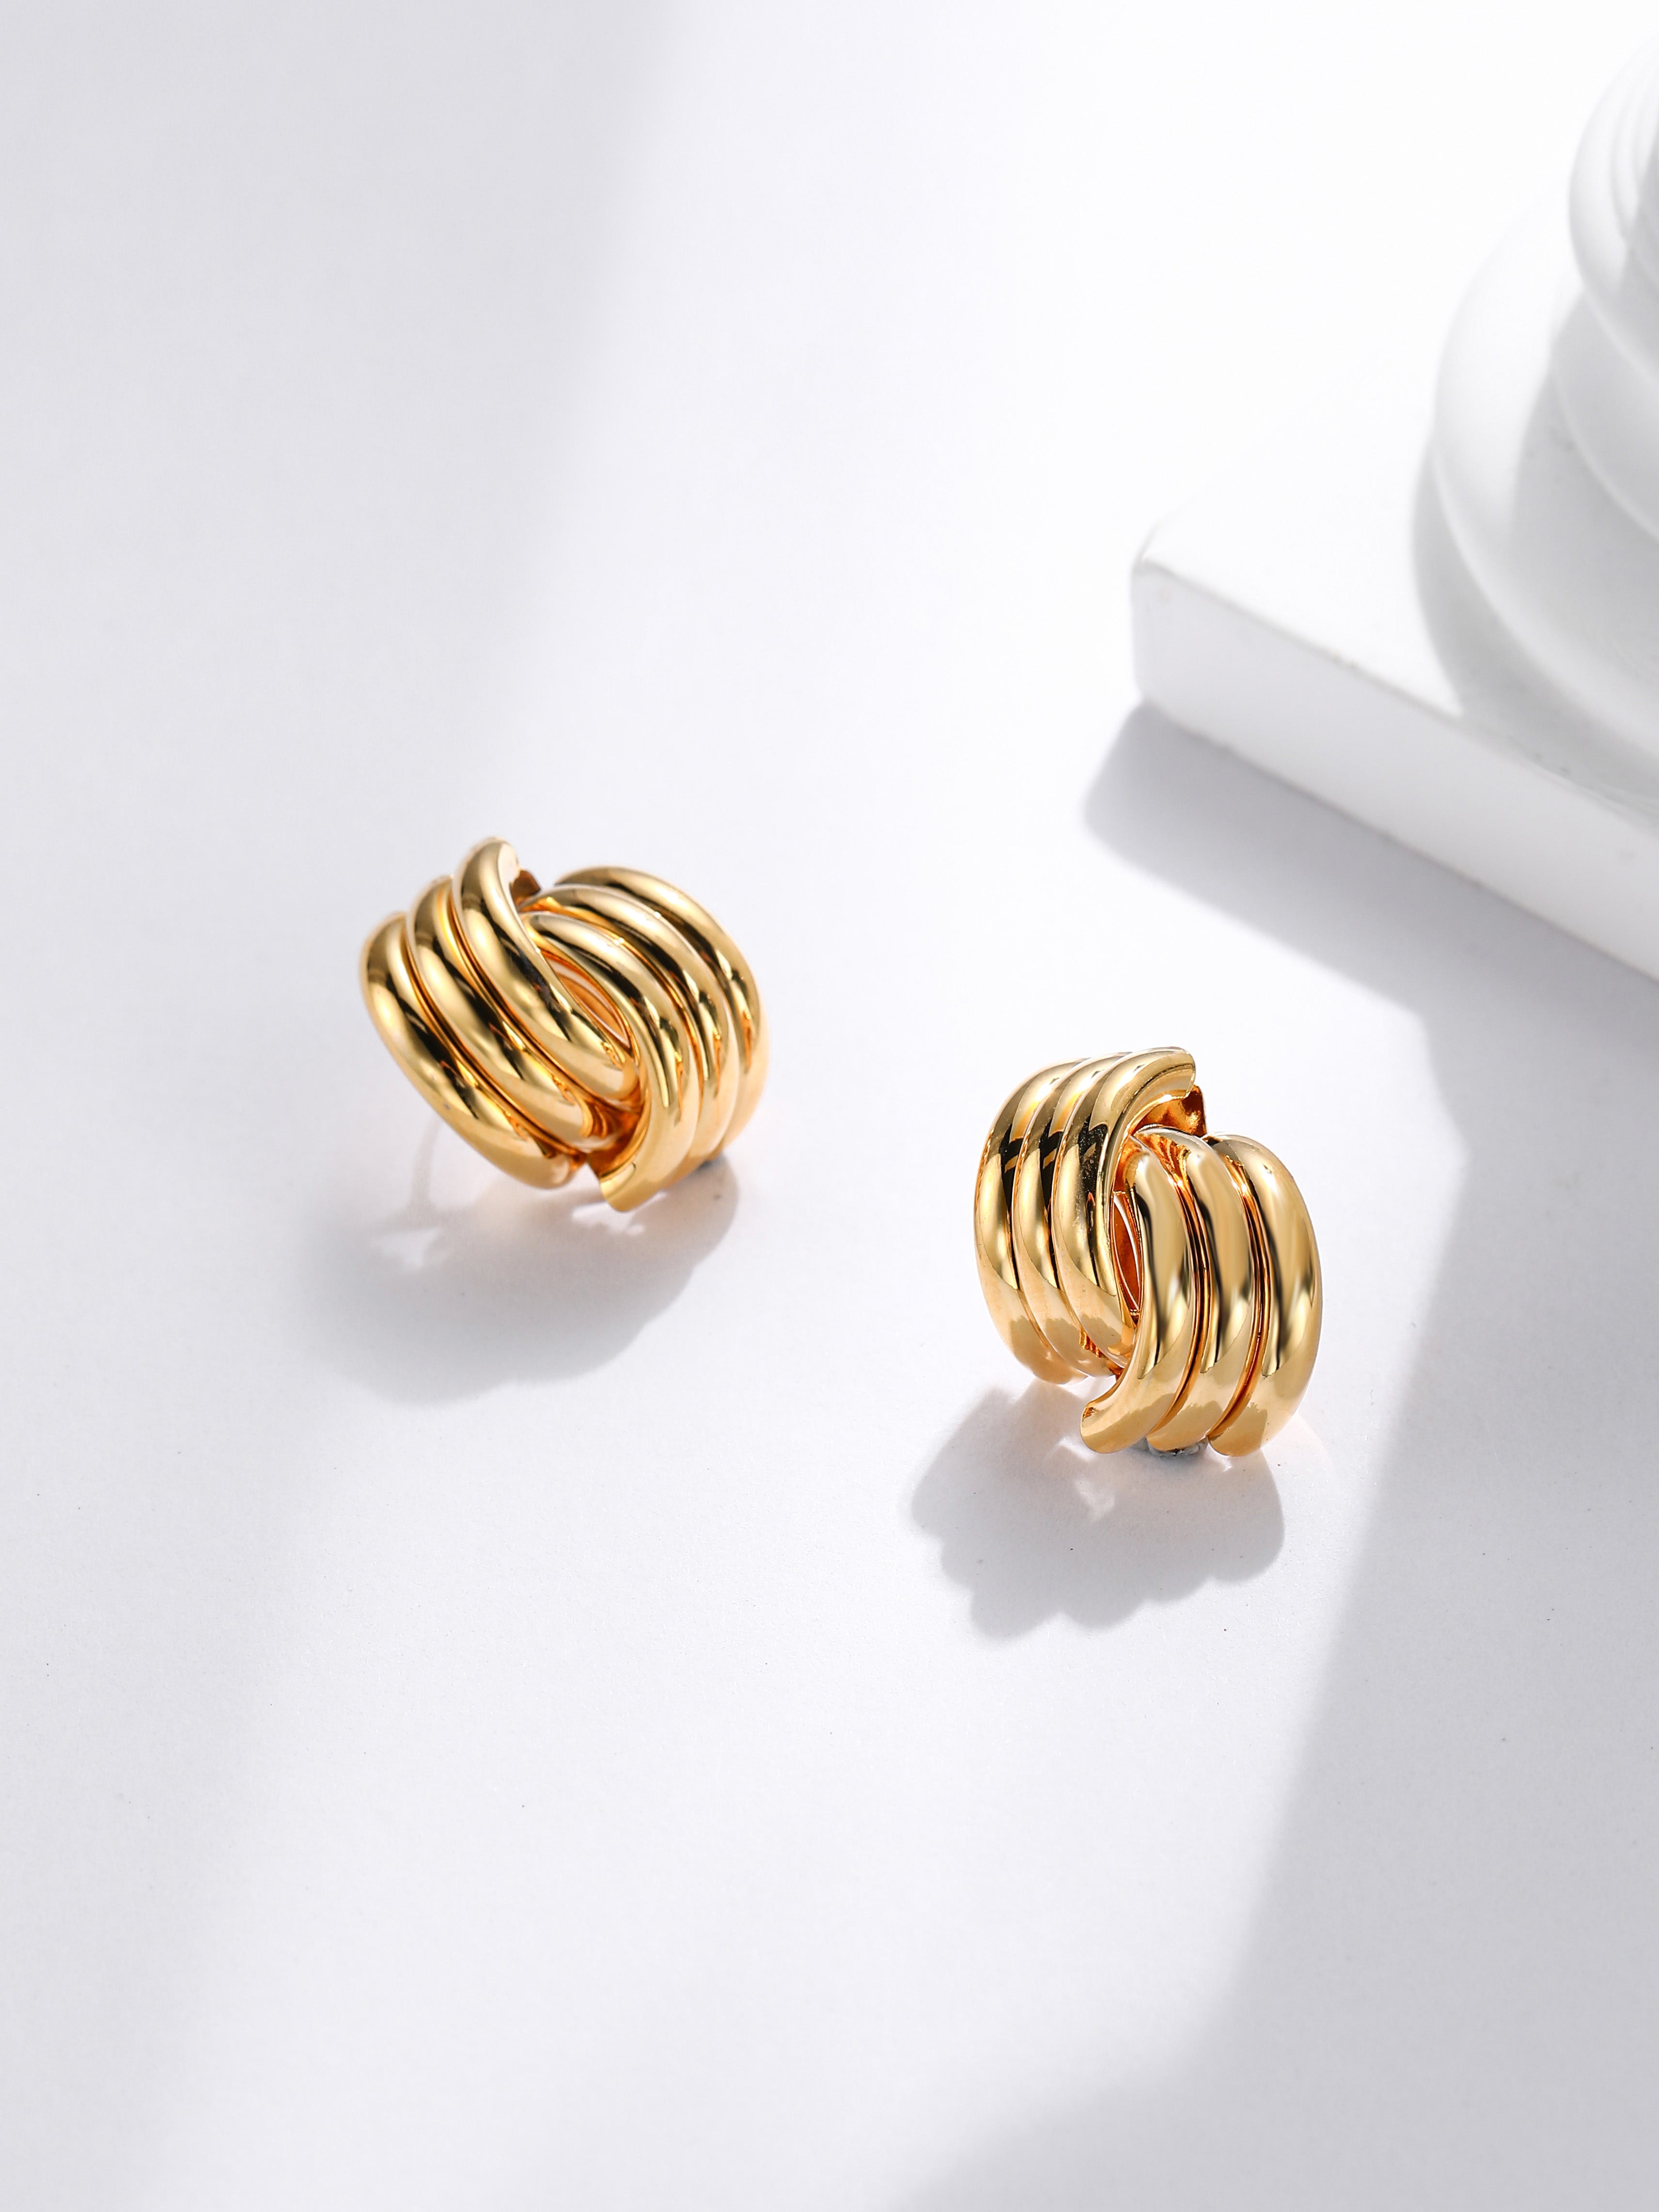 How to Buy the Latest Design Gold Earrings for Women: A Complete Guide